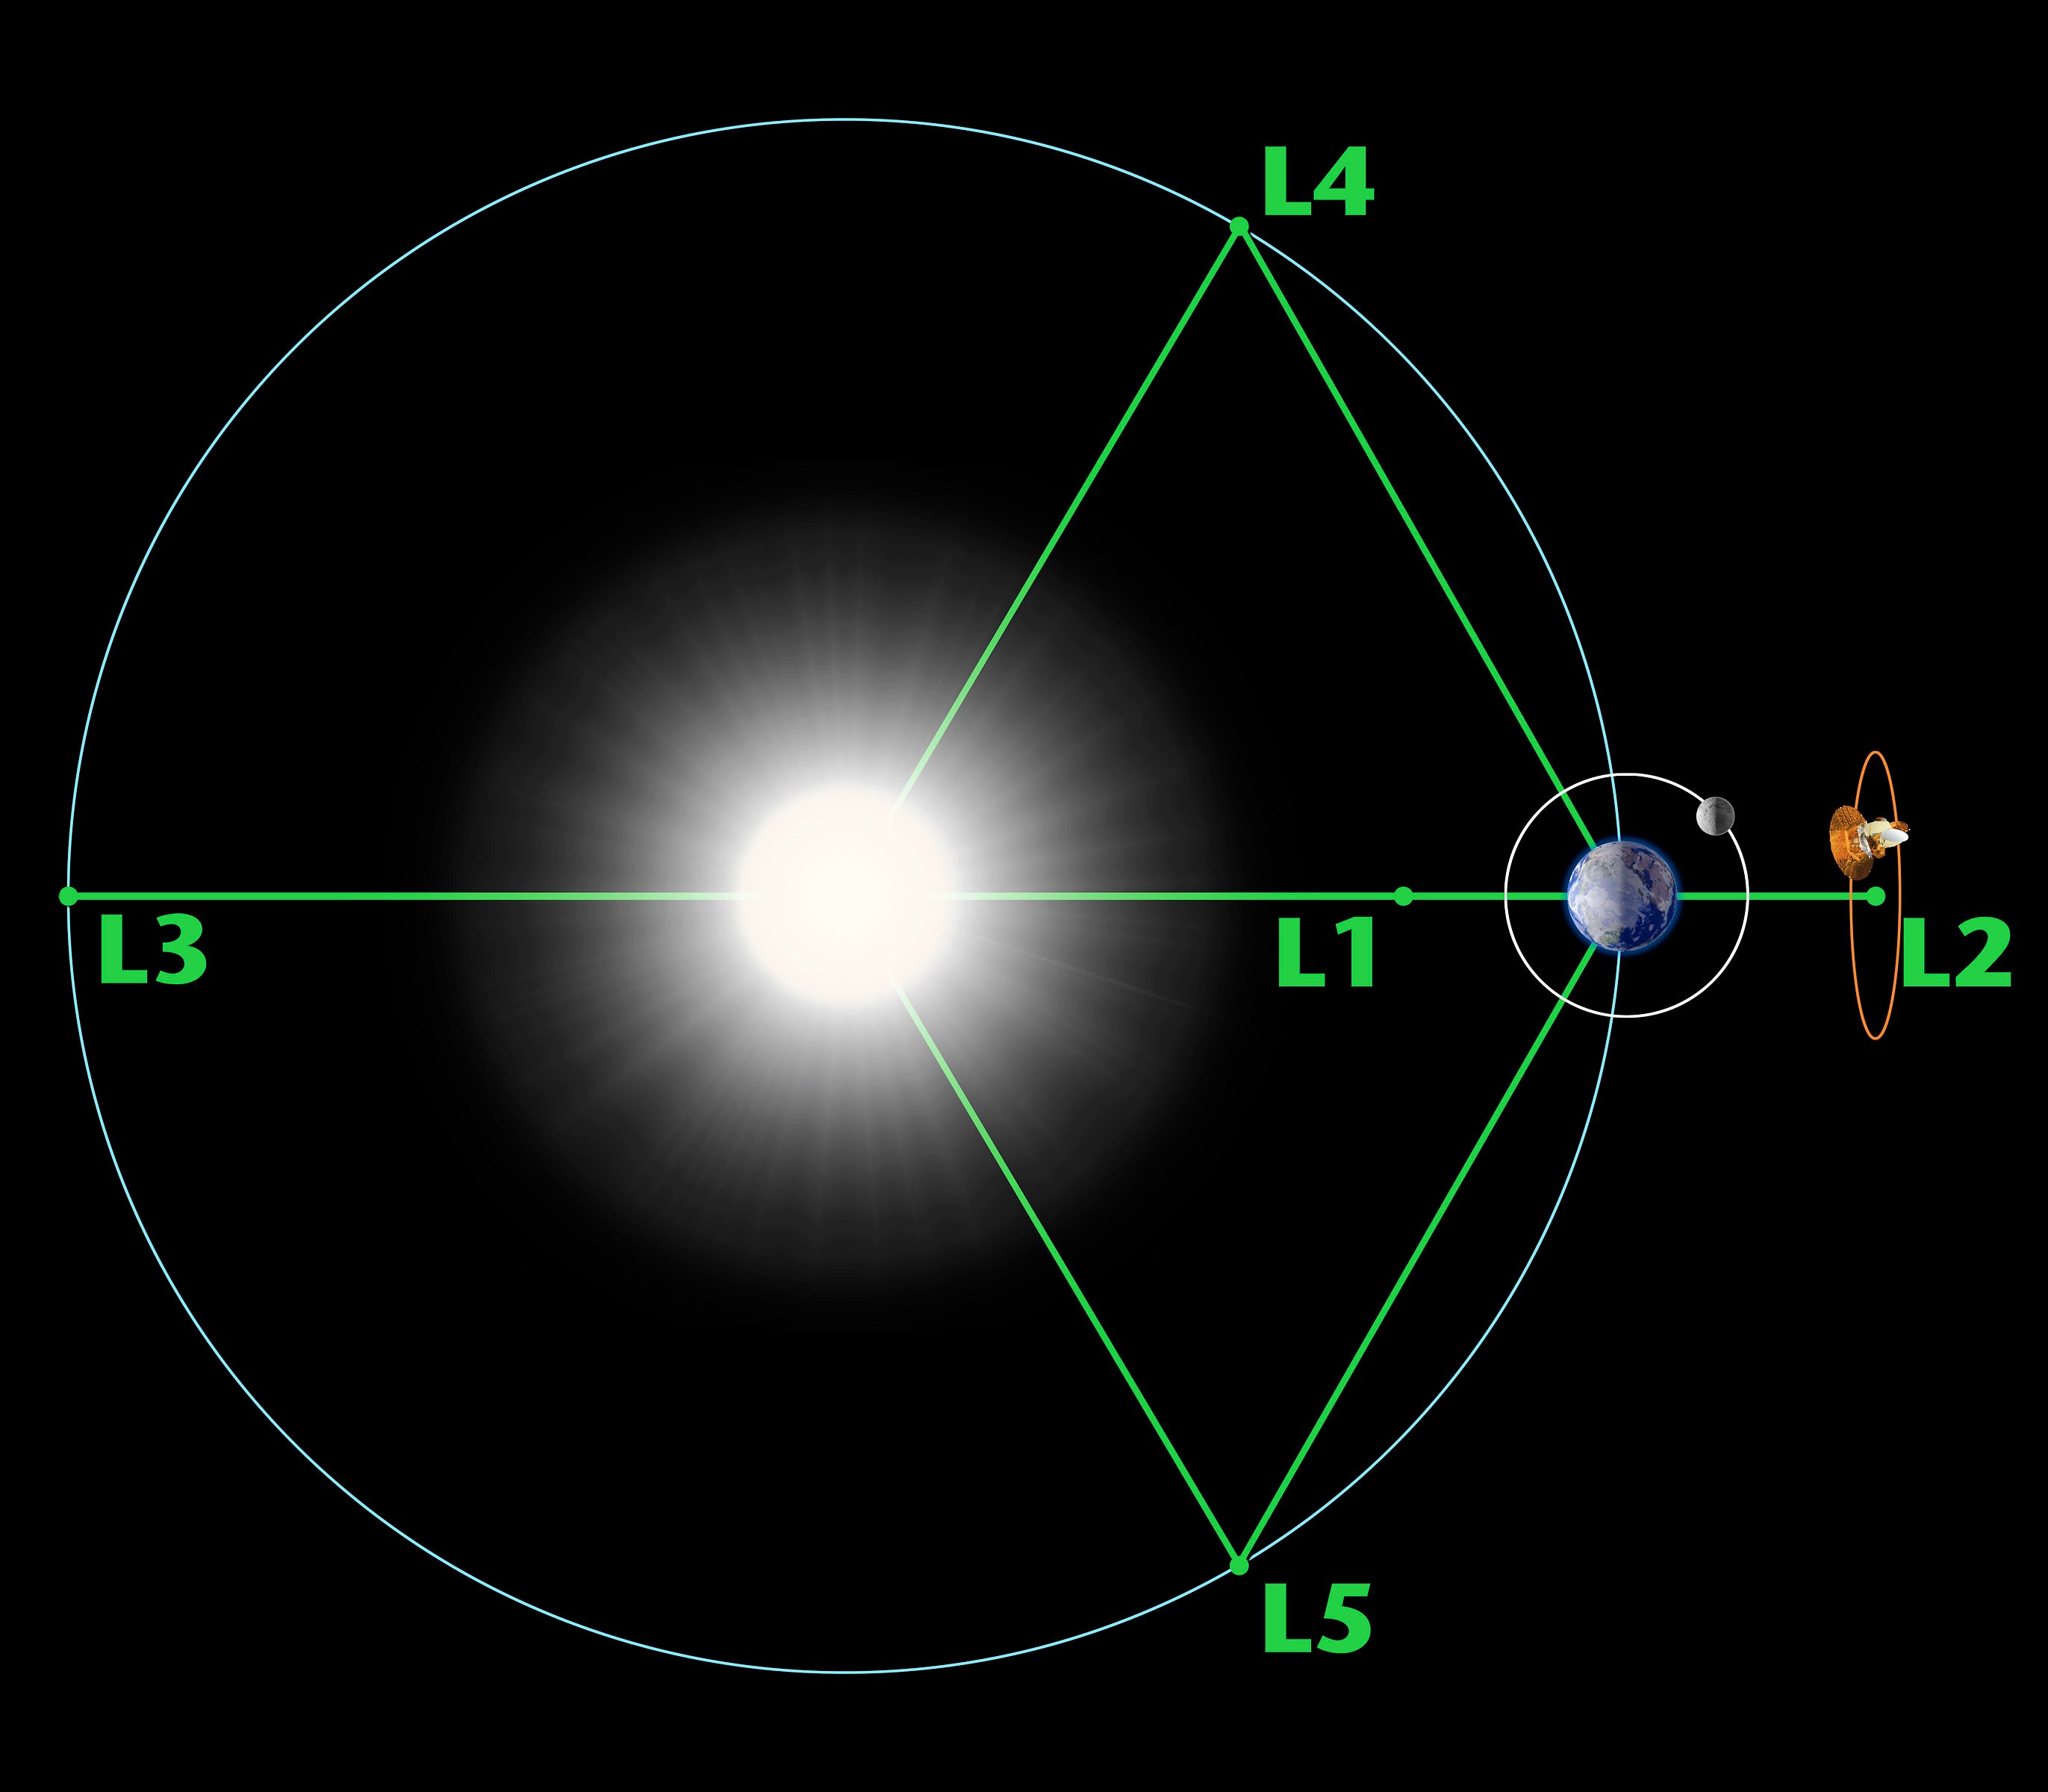 A Nasa illustration of the Lagrangian points relative to the Earth in relation to the Sun. These are areas where objects can remain in a stable position relative to the Earth.